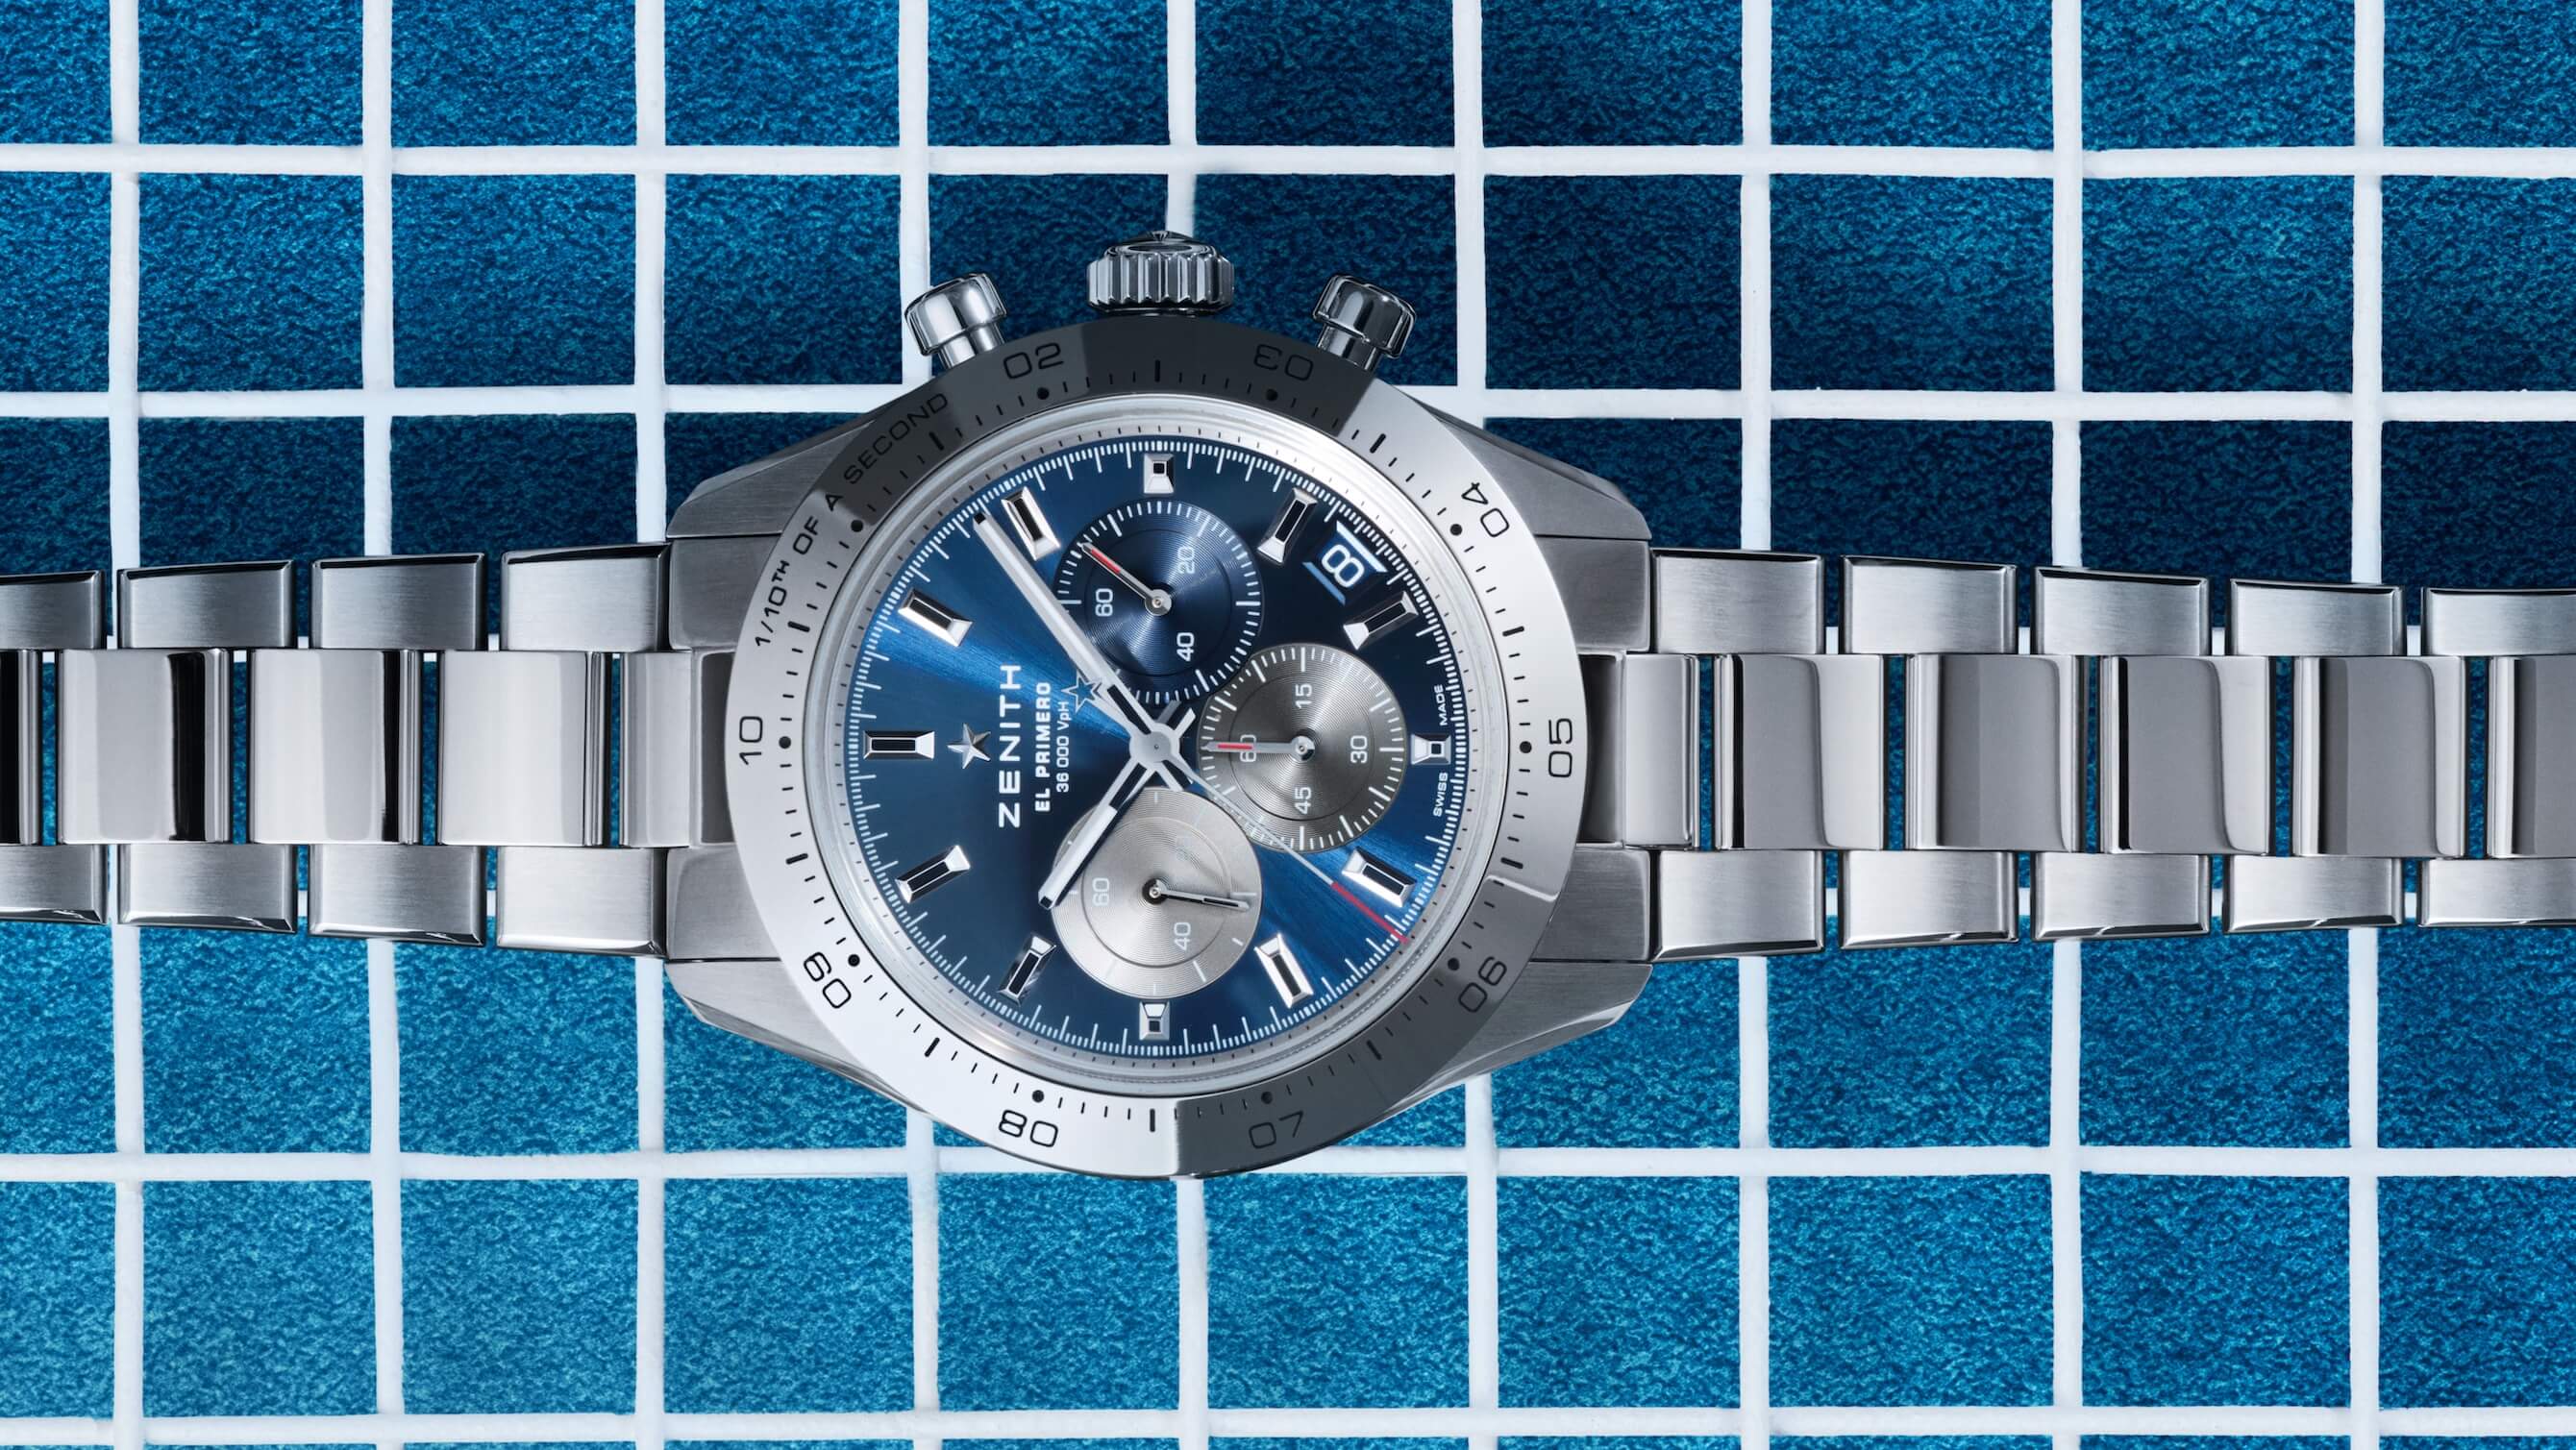 This new steel Zenith Chronomaster Sport debuts a blue dial, but ditches the ceramic bezel